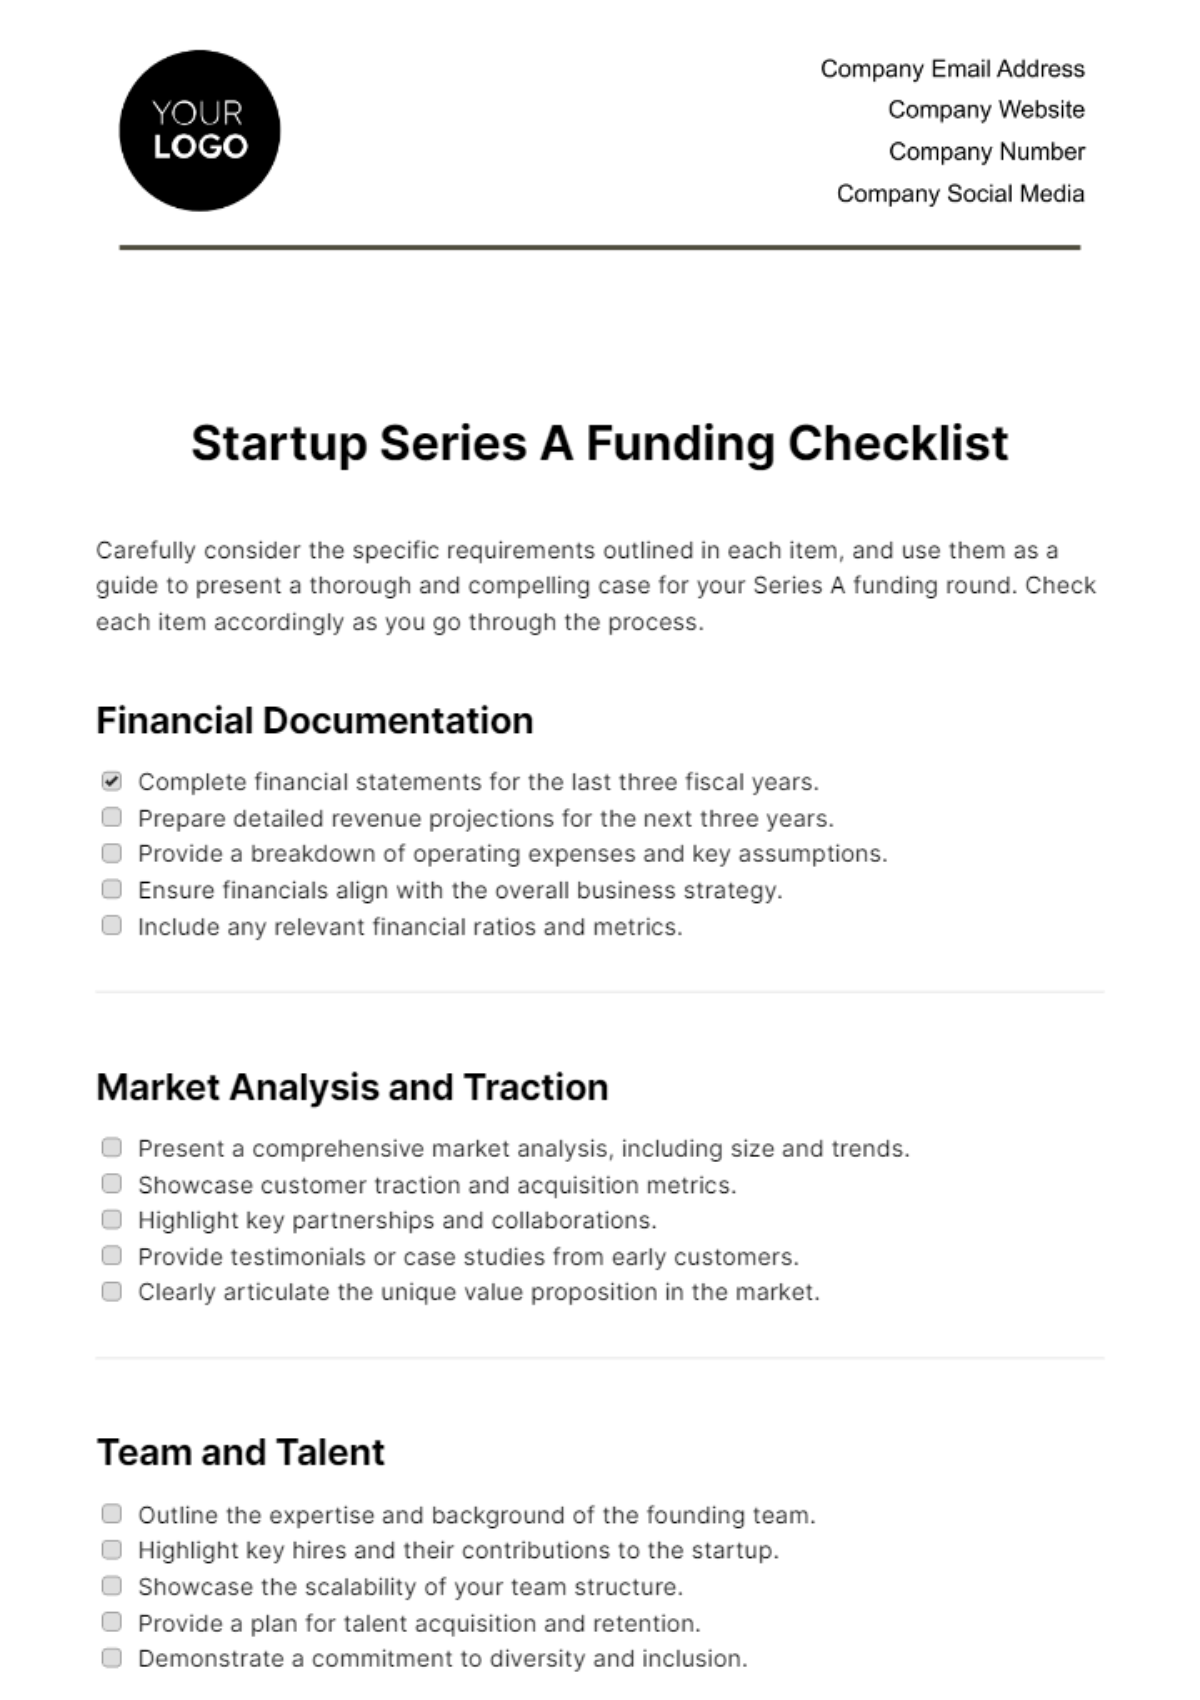 Startup Series A Funding Checklist Template